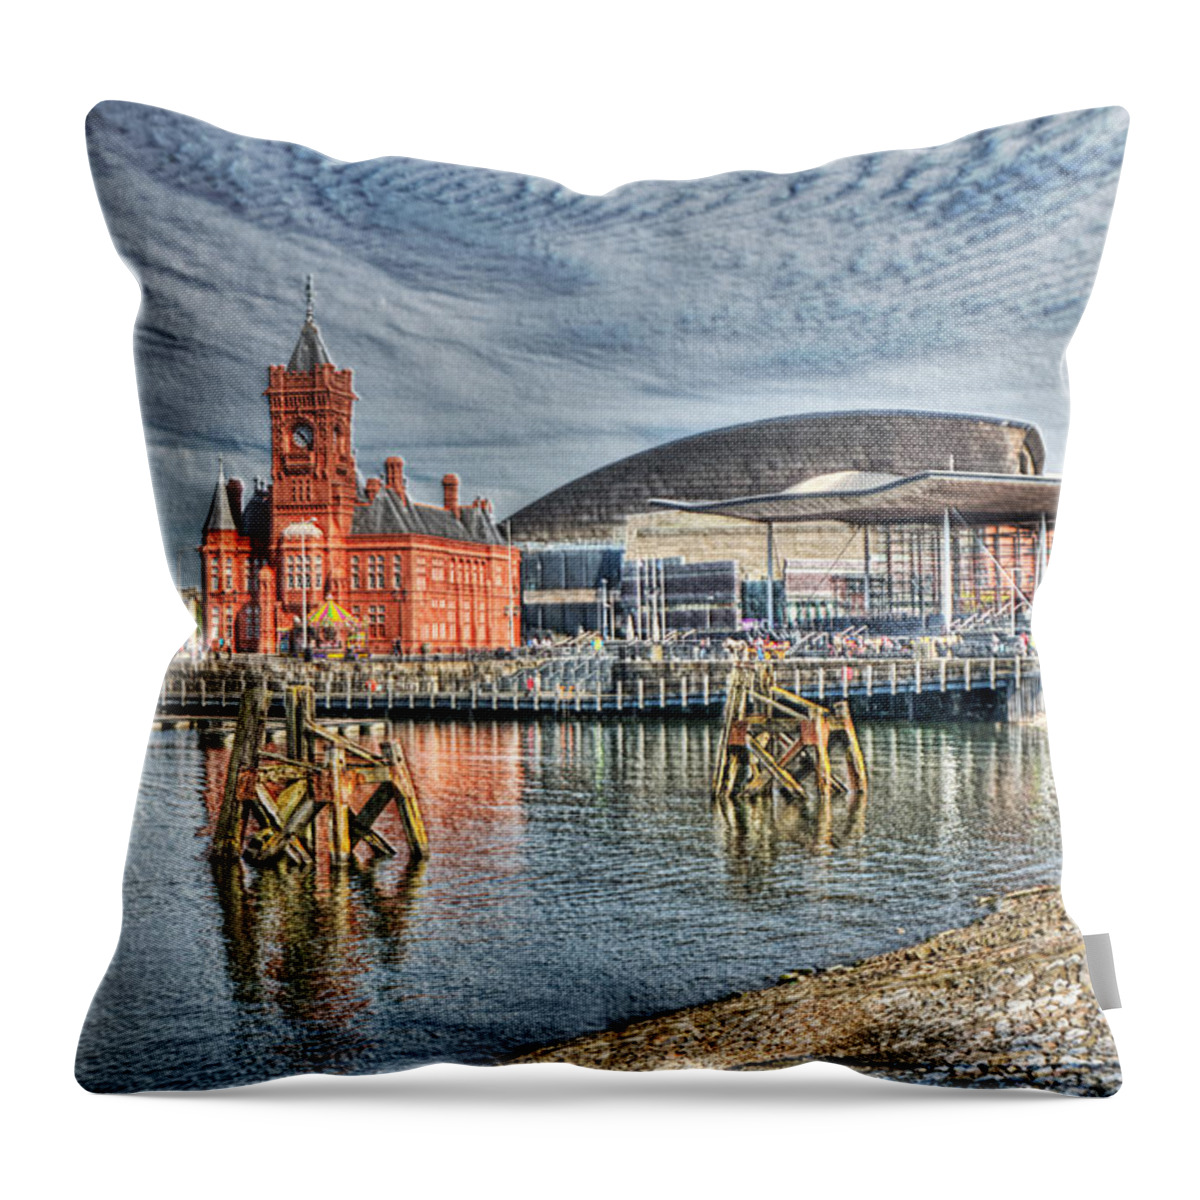 Cardiff Bay Throw Pillow featuring the photograph Cardiff Bay Textured by Steve Purnell